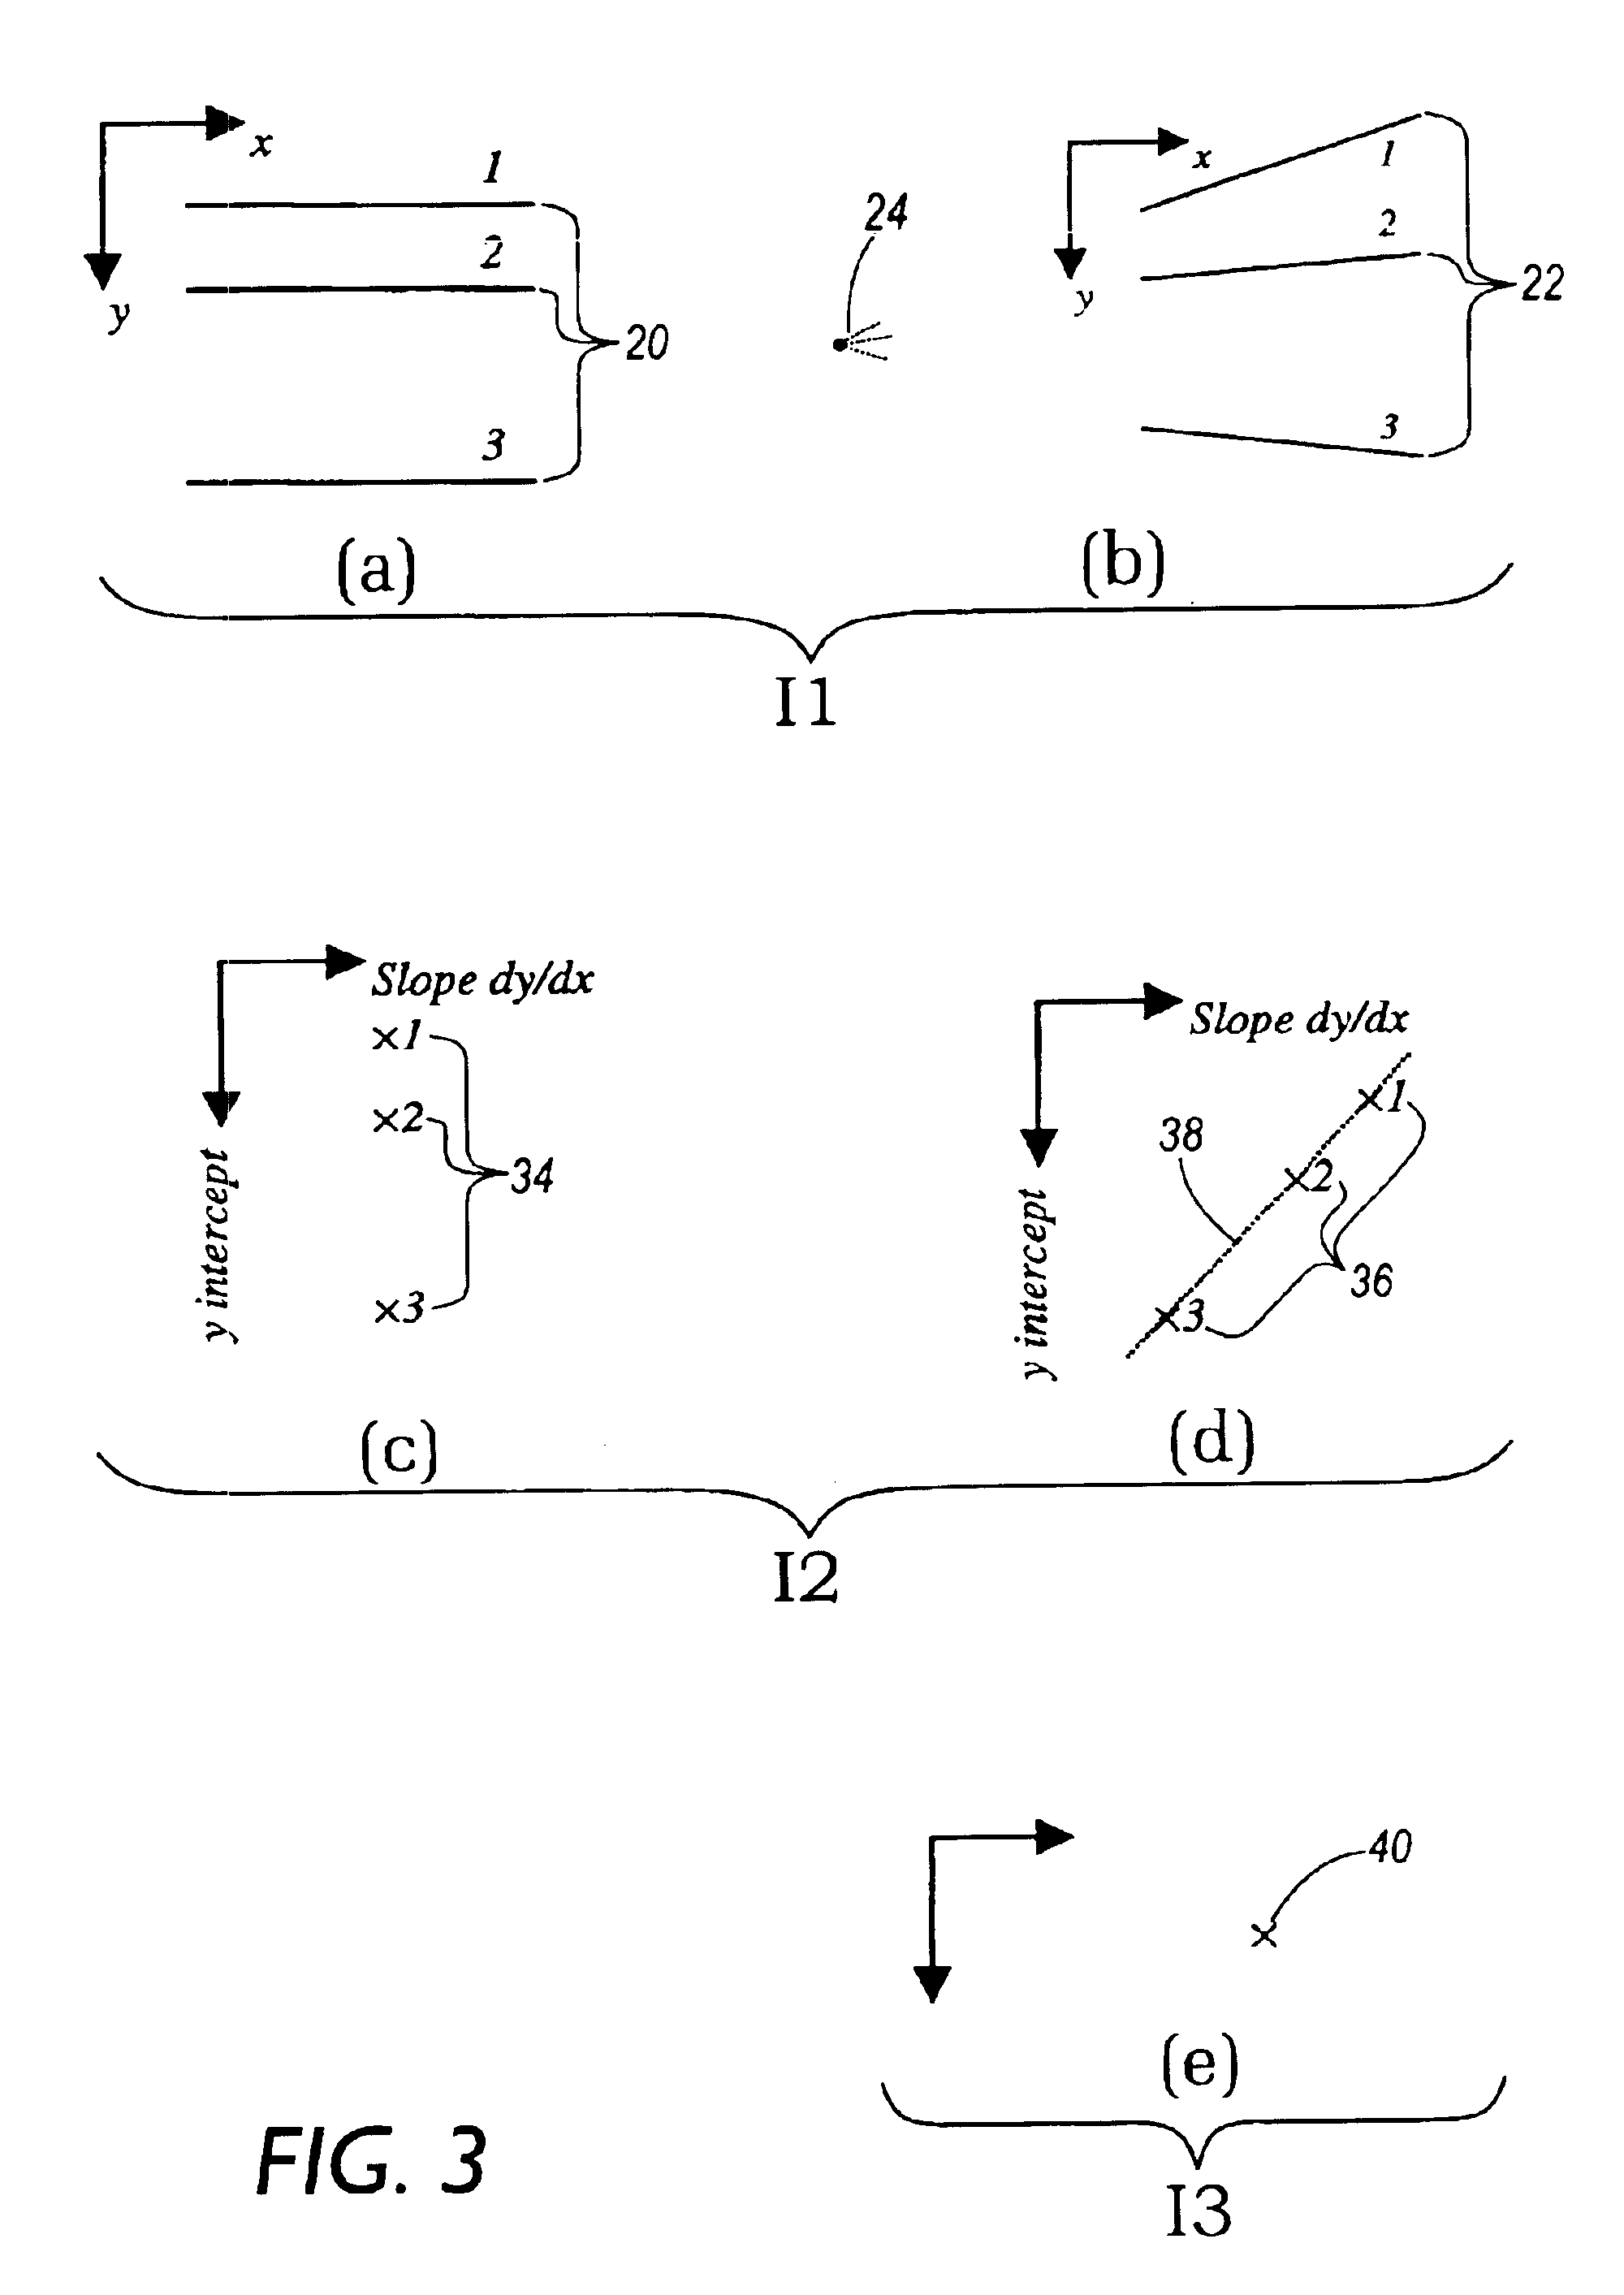 Method and apparatus for resolving perspective distortion in a document image and for calculating line sums in images